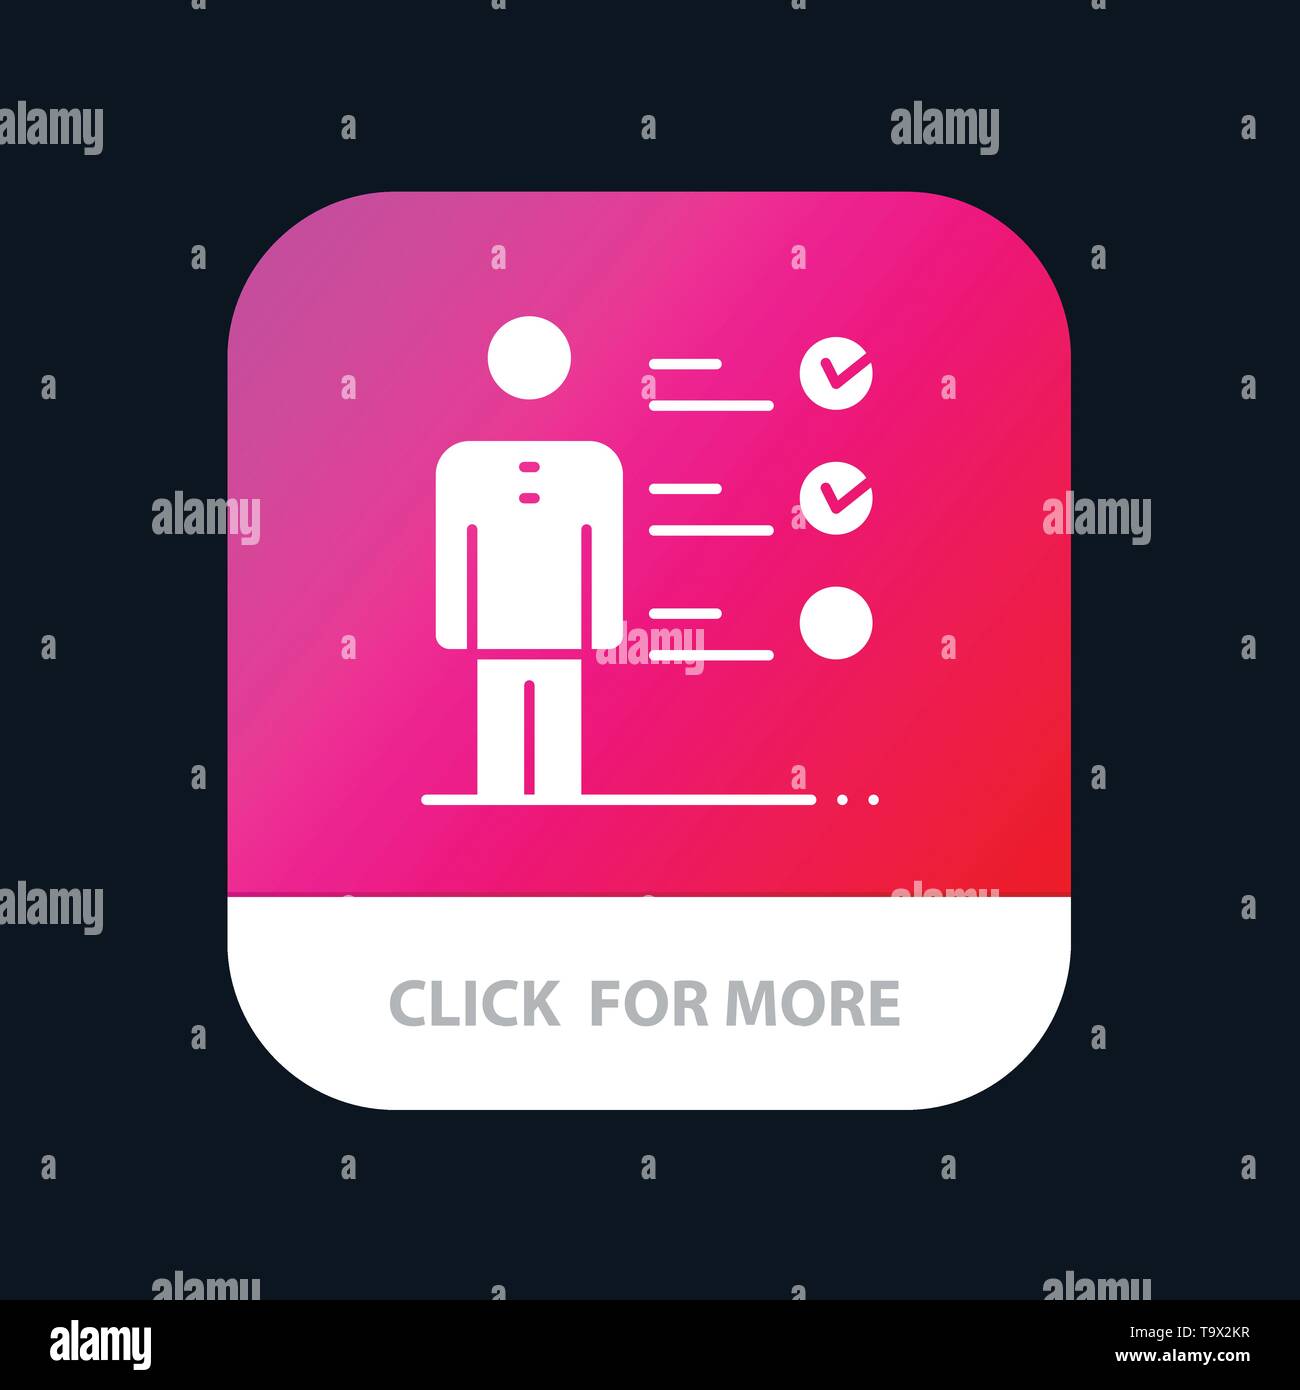 Professional Skills, Skills, Jobs kills, Professional Ability Mobile App Button. Android and IOS Glyph Version Stock Vector